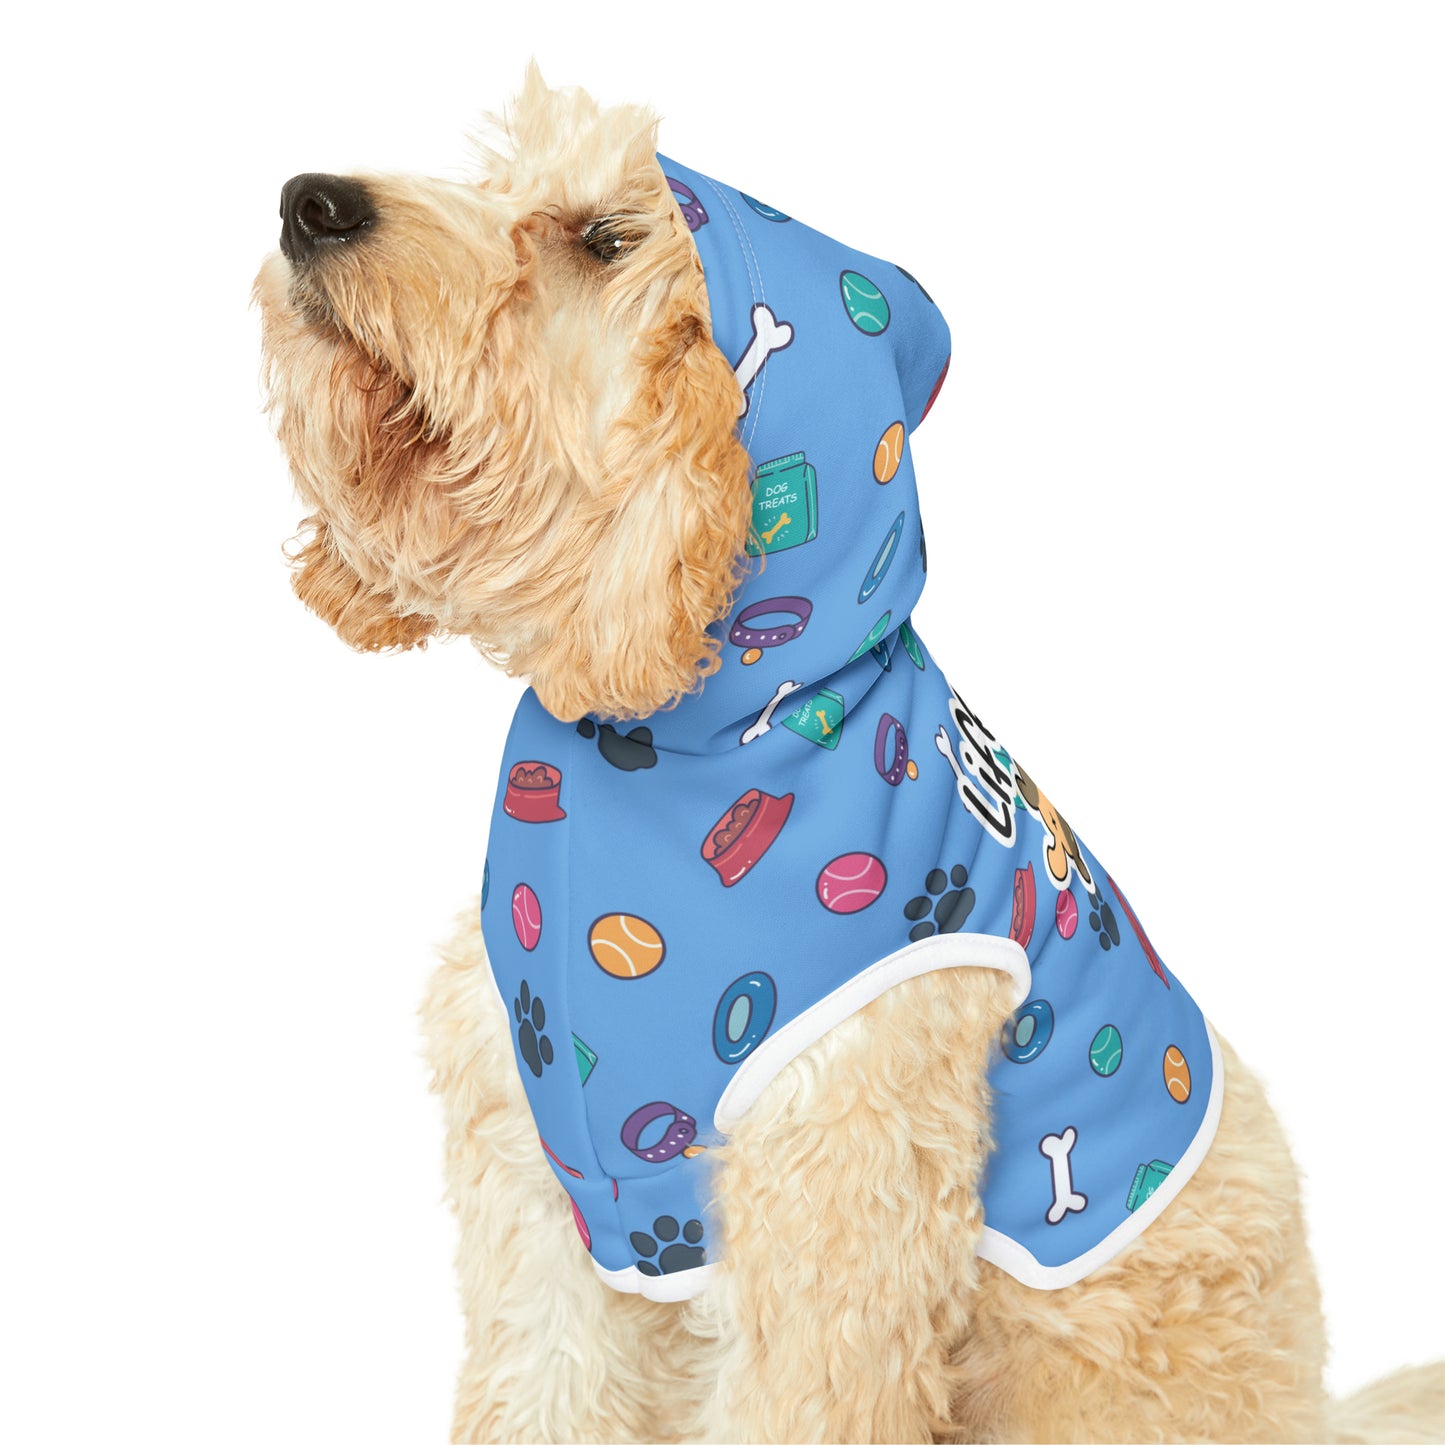 Side view of a cute dog wearing a pet hoodie with a beautiful pattern design featuring all things dog love. A smiling dog sleeping below a message that says "Life's hard". Hoodie's Color is blue